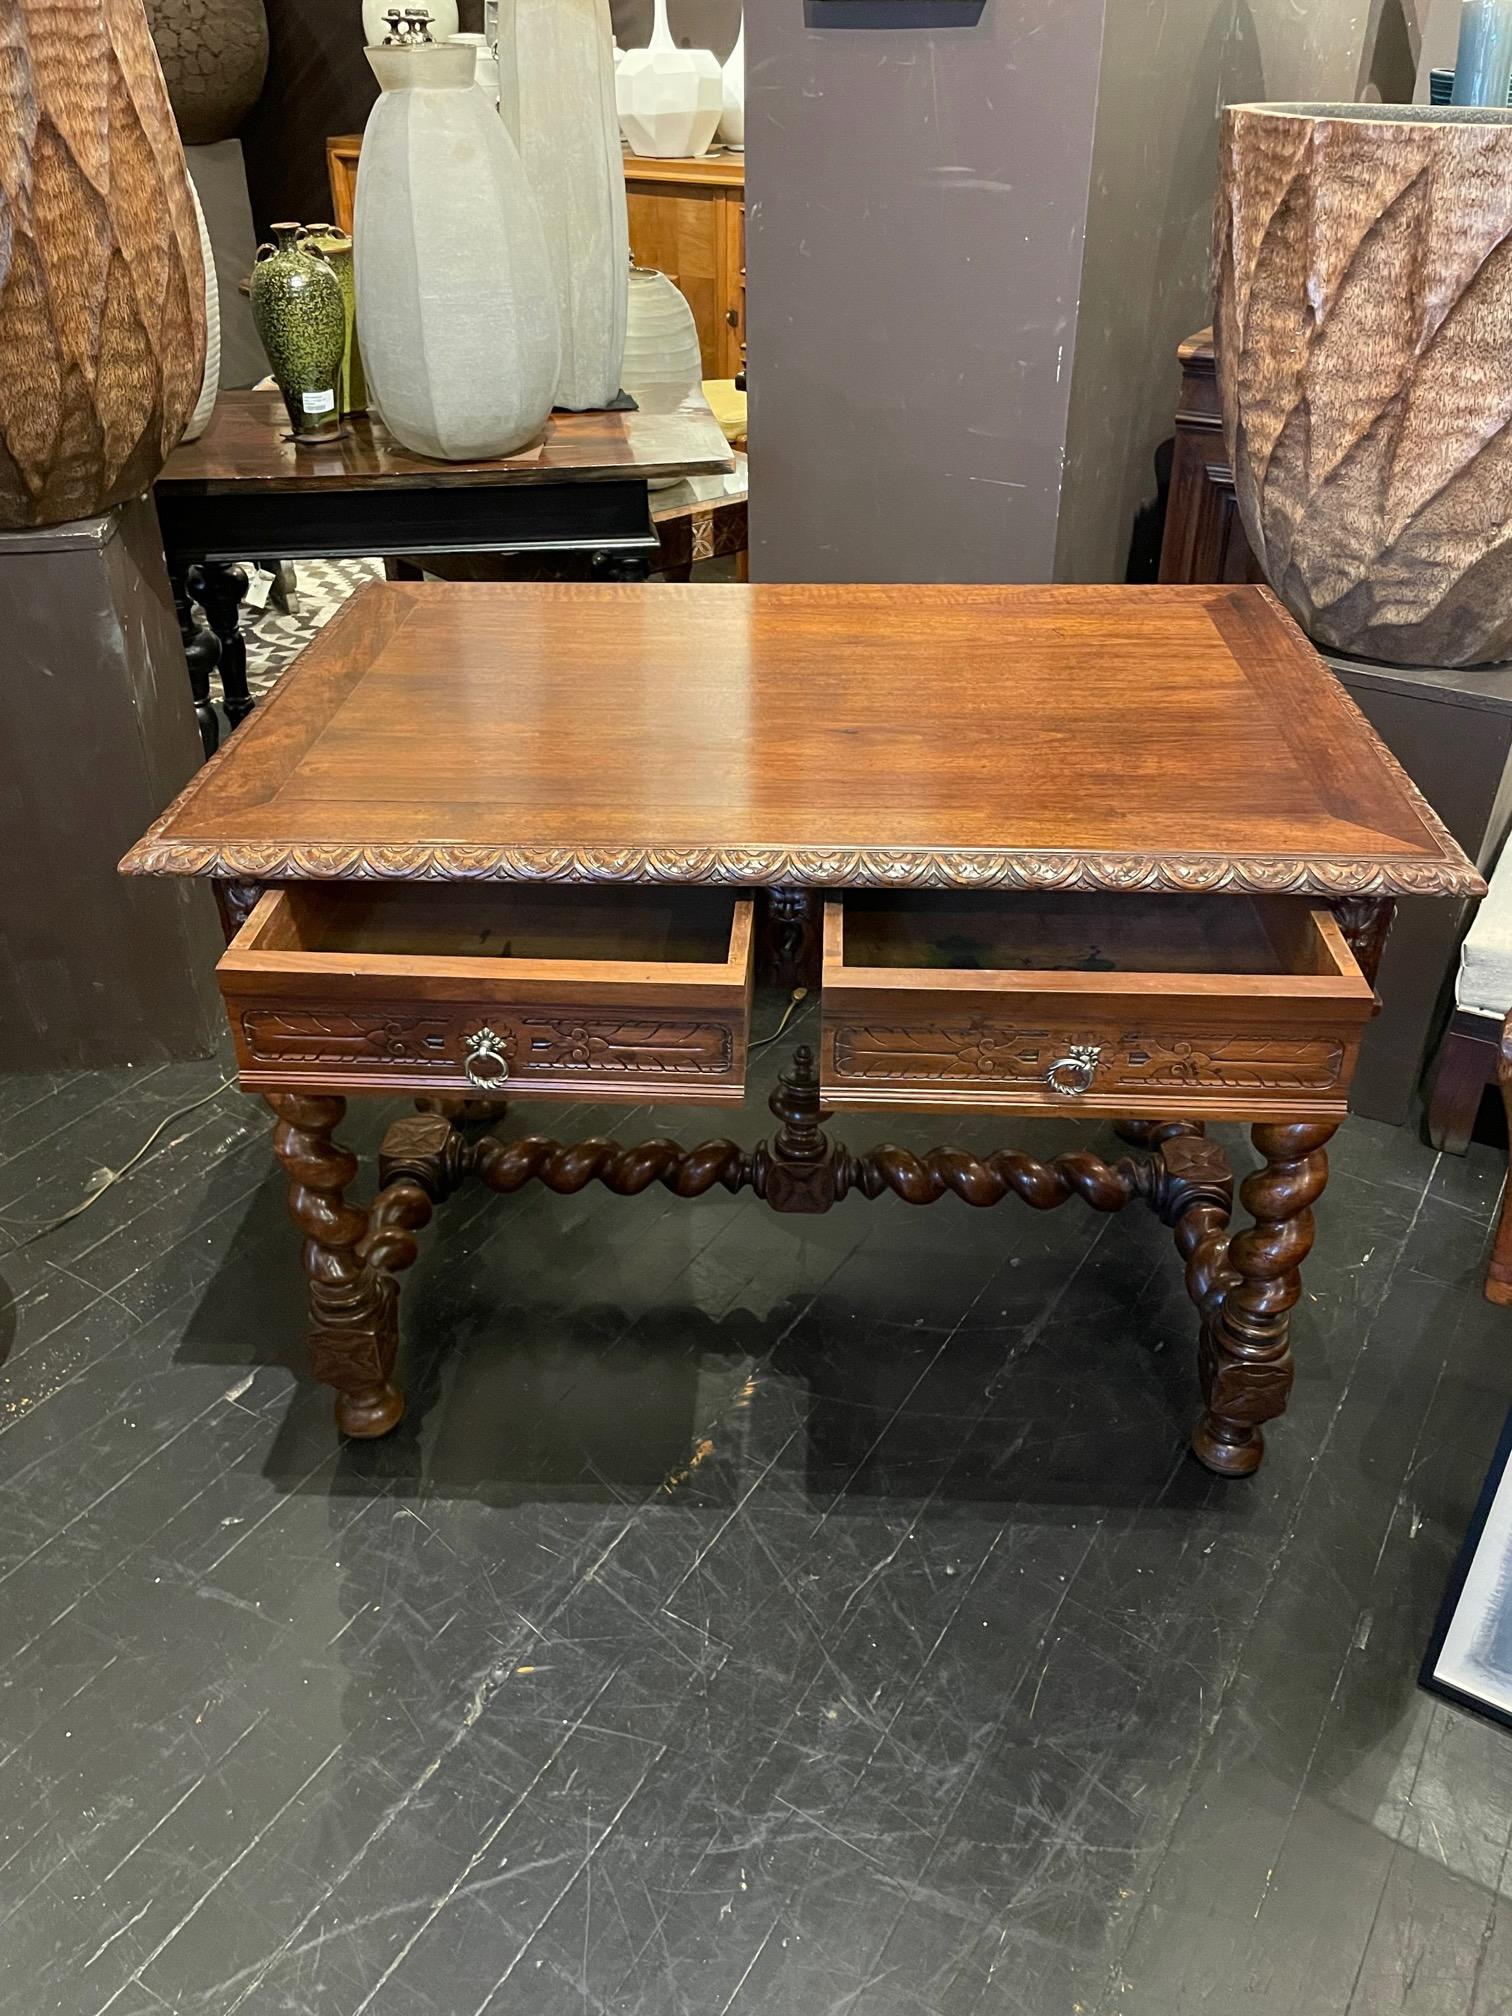 19th century French barley twist legs desk.
Center drawer.
Decorative finial at cross stretcher local.
Brass pulls.
Can also be used as a side table.
Walnut.